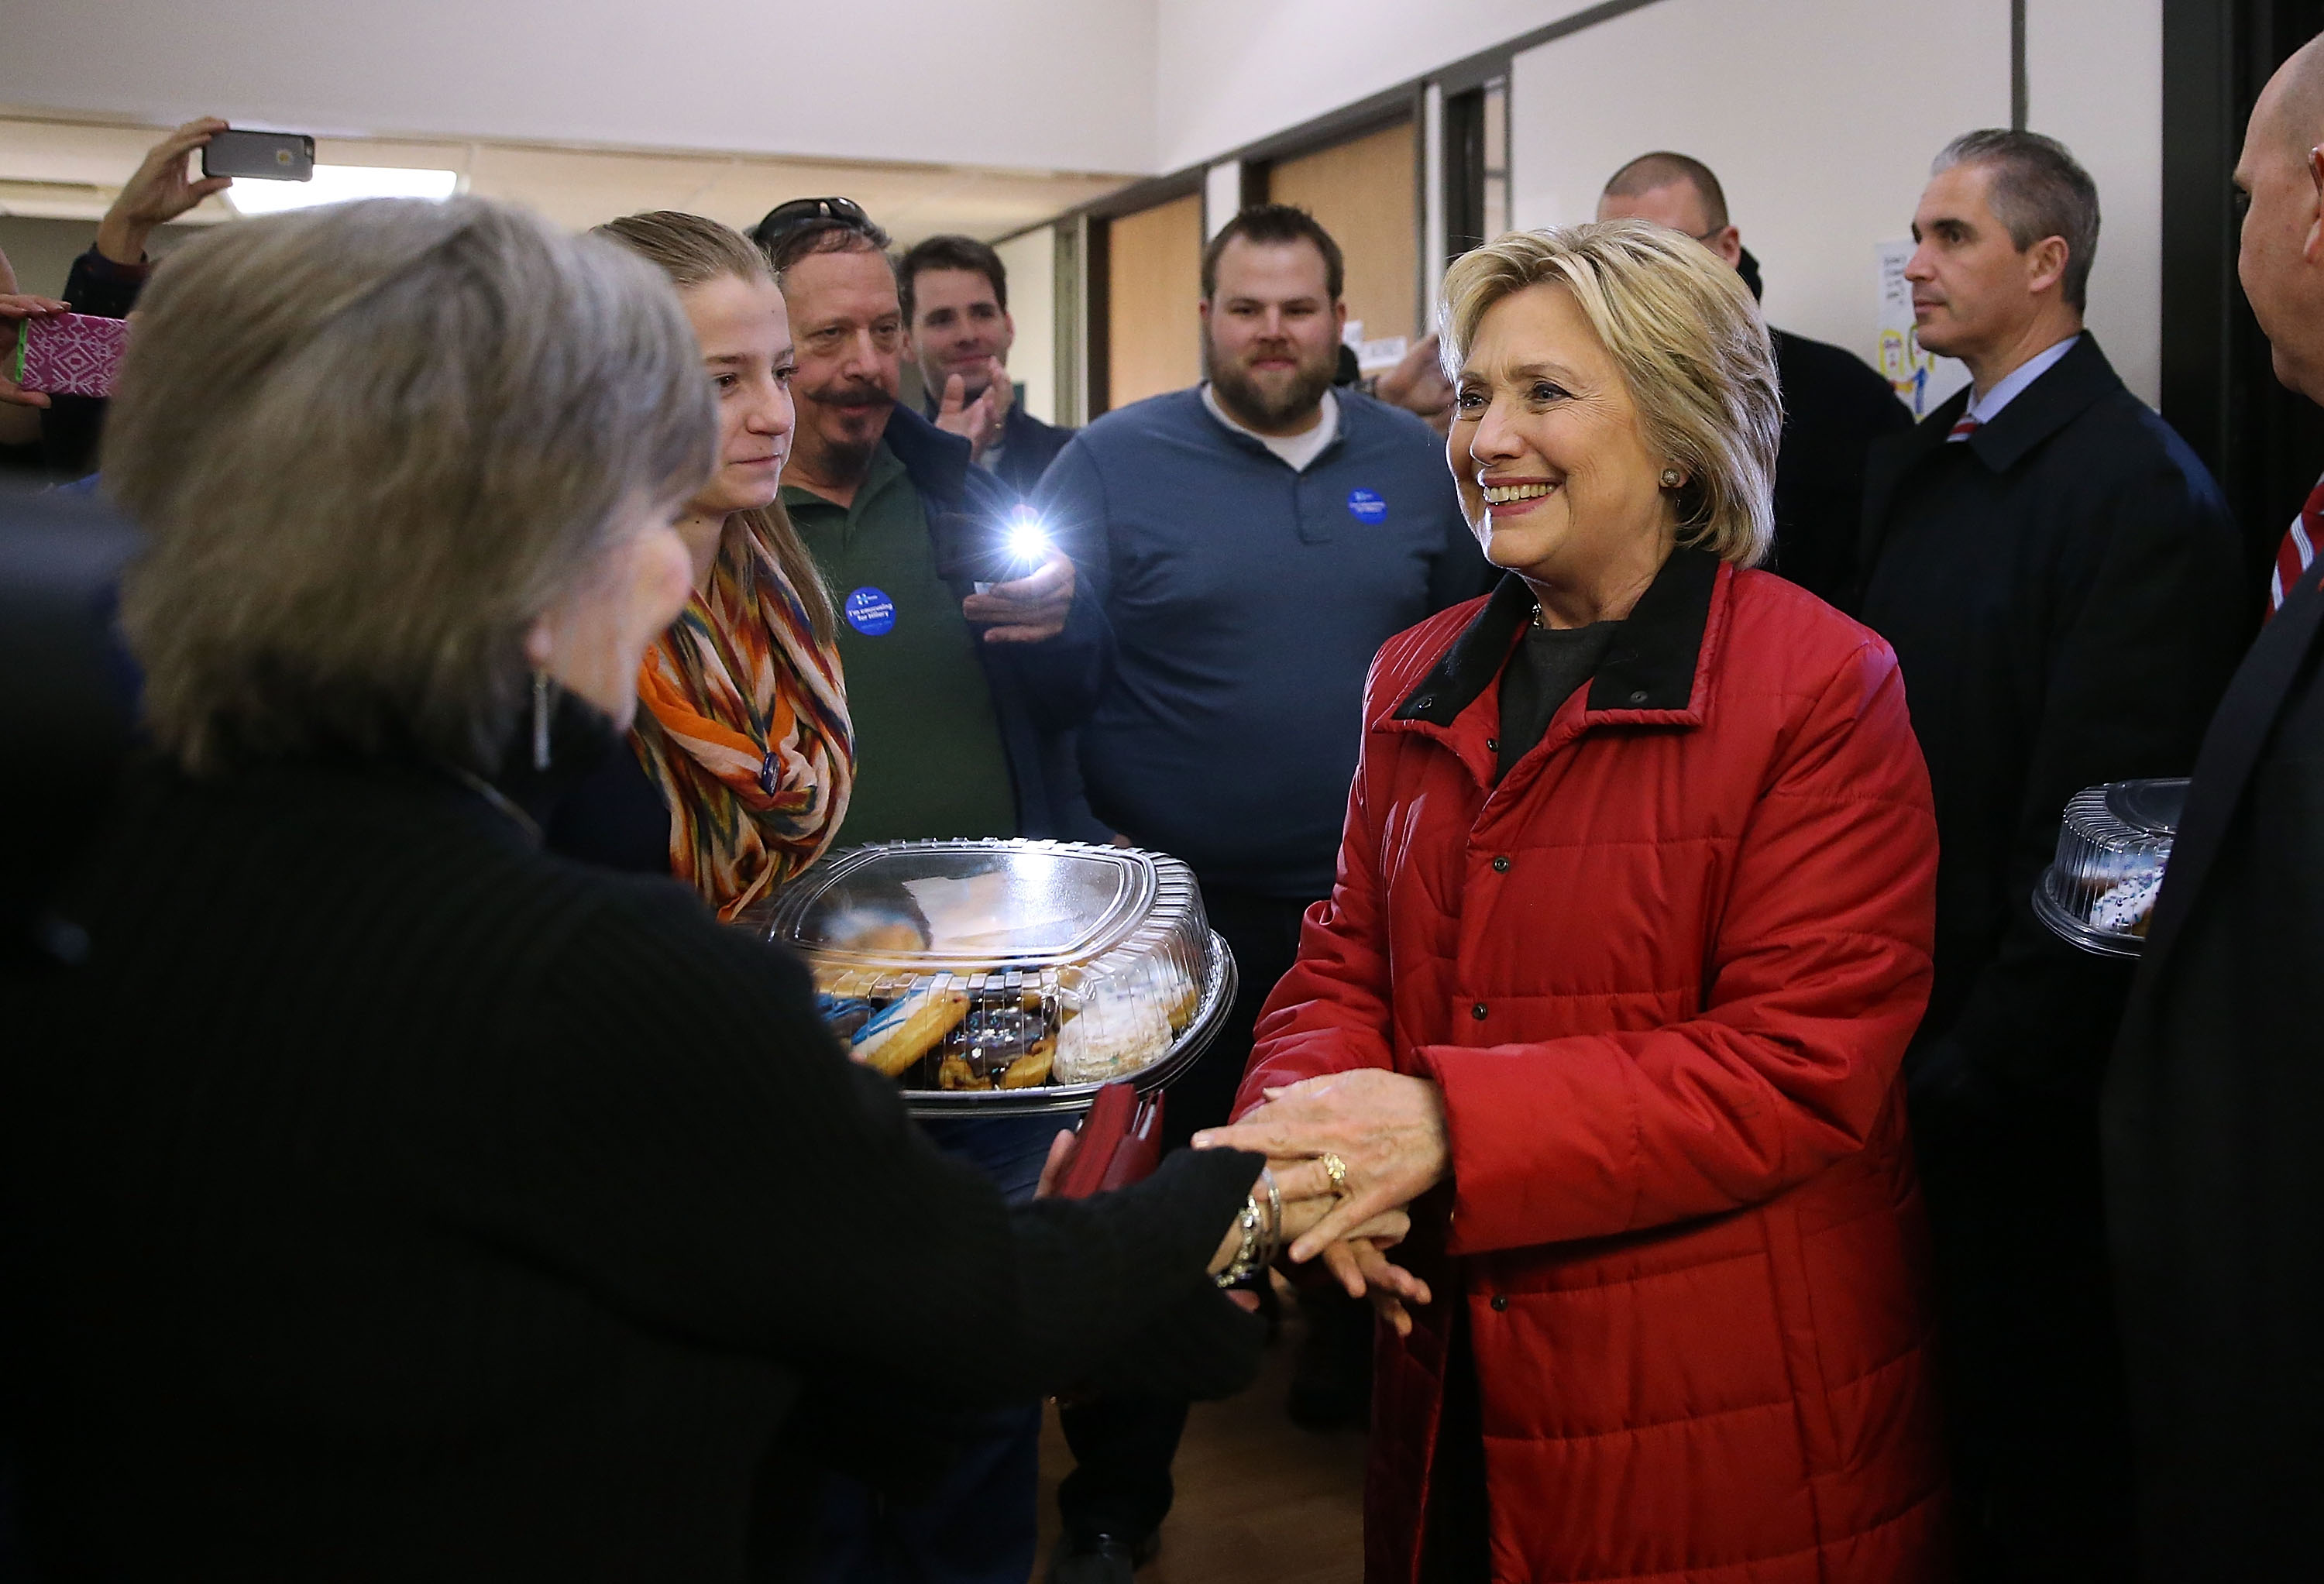 Democratic presidential candidate former Secretary of State Hillary Clinton today. She did not appear with Mayor Bill de Blasio, who went to Iowa to campaign for her. (Photo by Justin Sullivan/Getty Images)